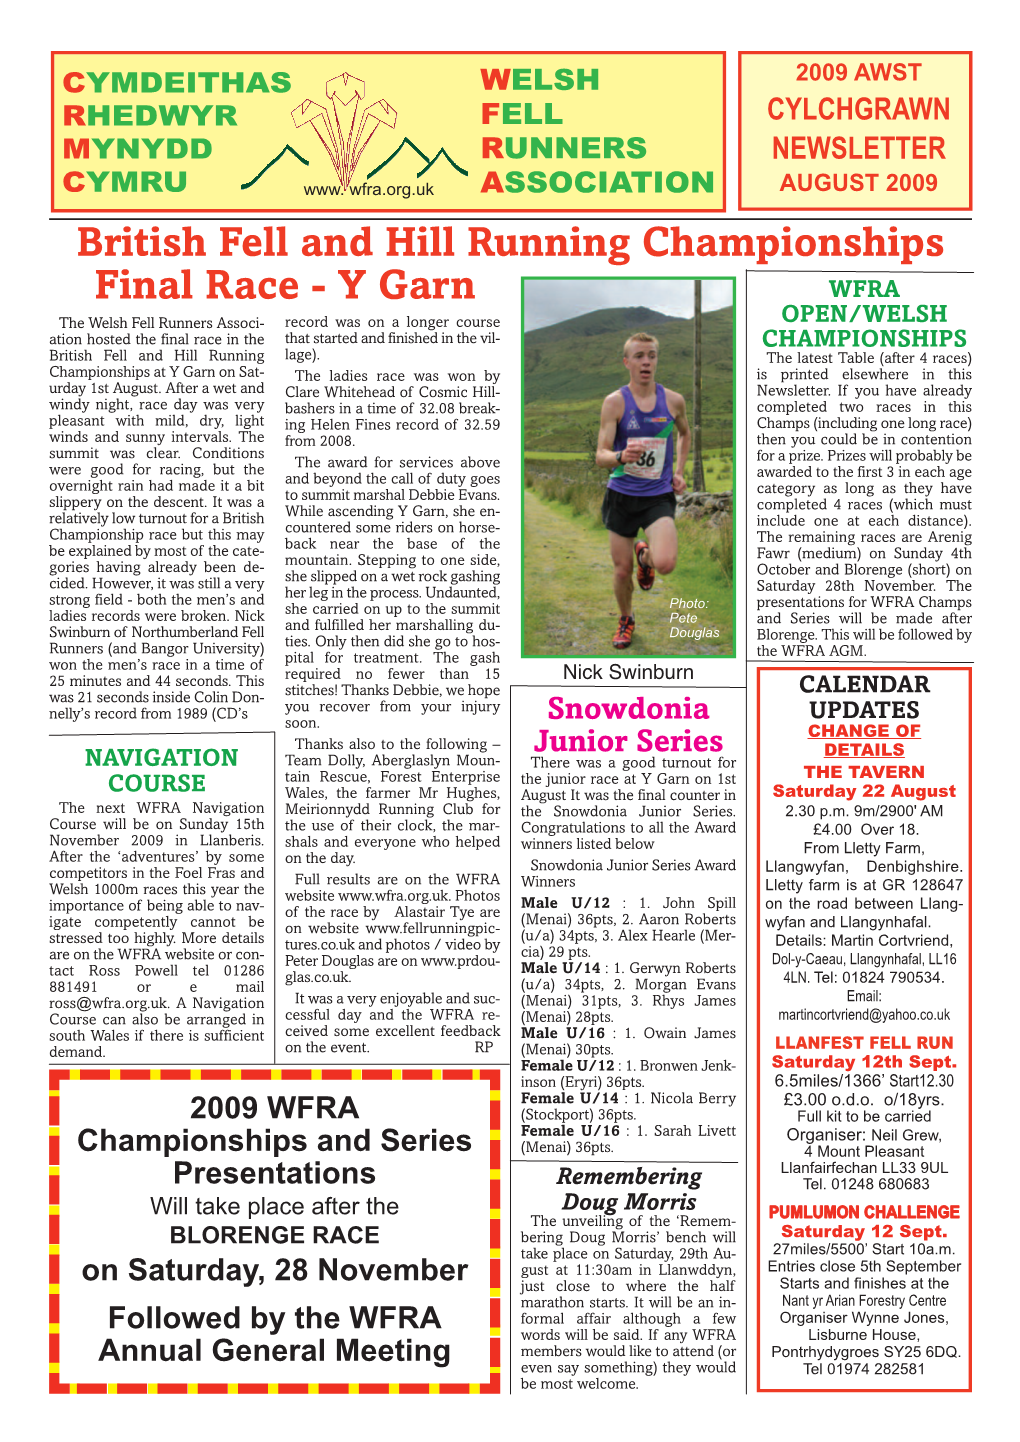 British Fell and Hill Running Championships Final Race